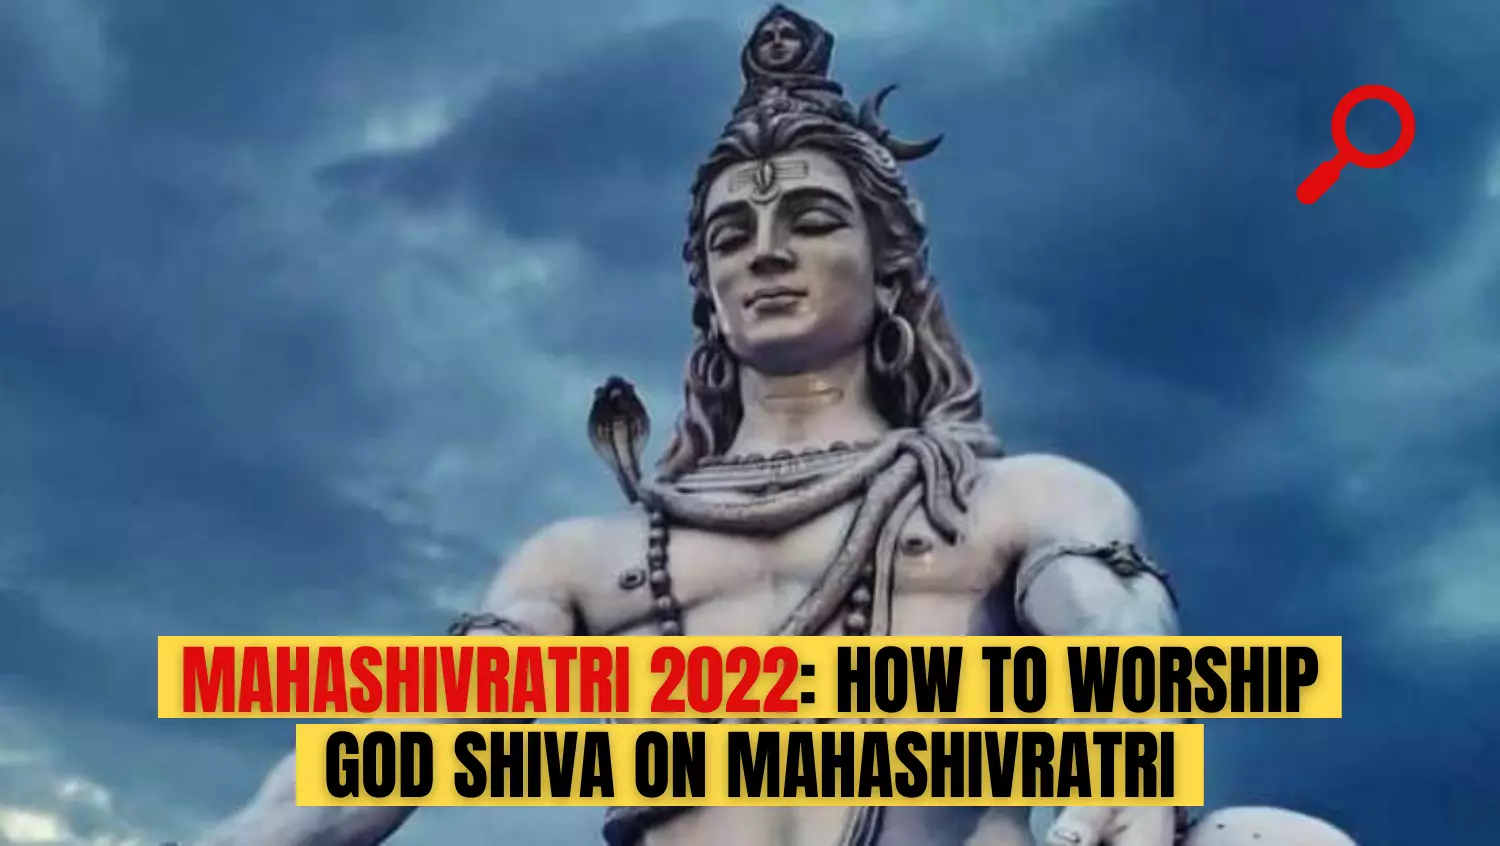 MahaShivratri 2022: How to worship God Shiva on Mahashivratri | Don't forget to offer these things on Shivling on the day of Mahashivratri